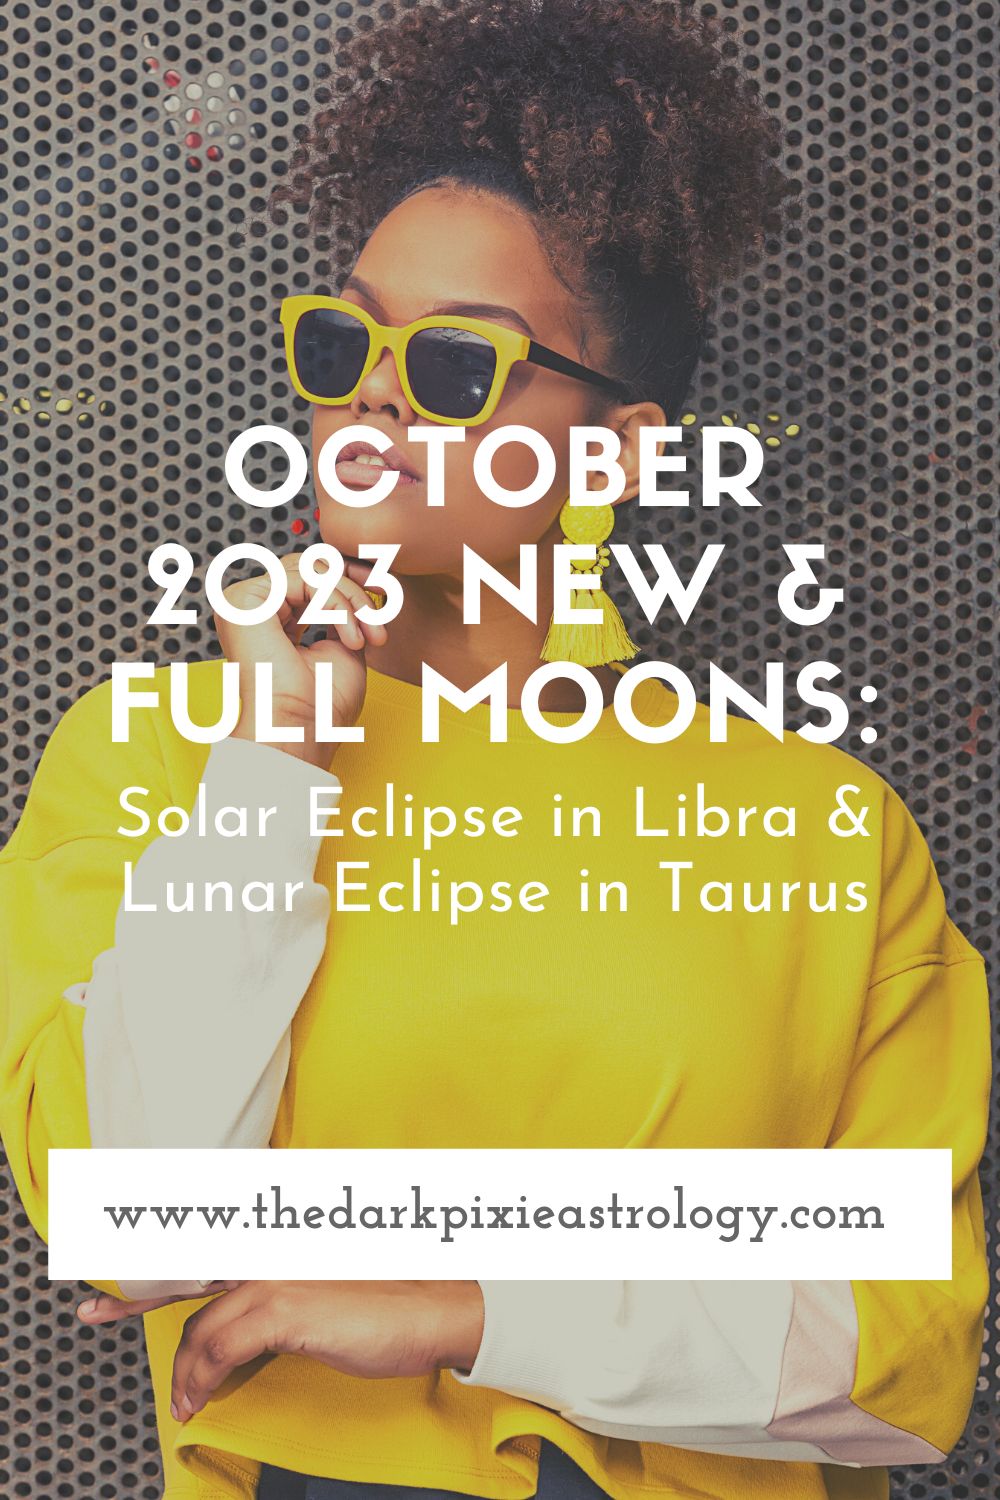 October 2023 New & Full Moons: Solar Eclipse in Libra & Lunar Eclipse in Taurus - The Dark Pixie Astrology